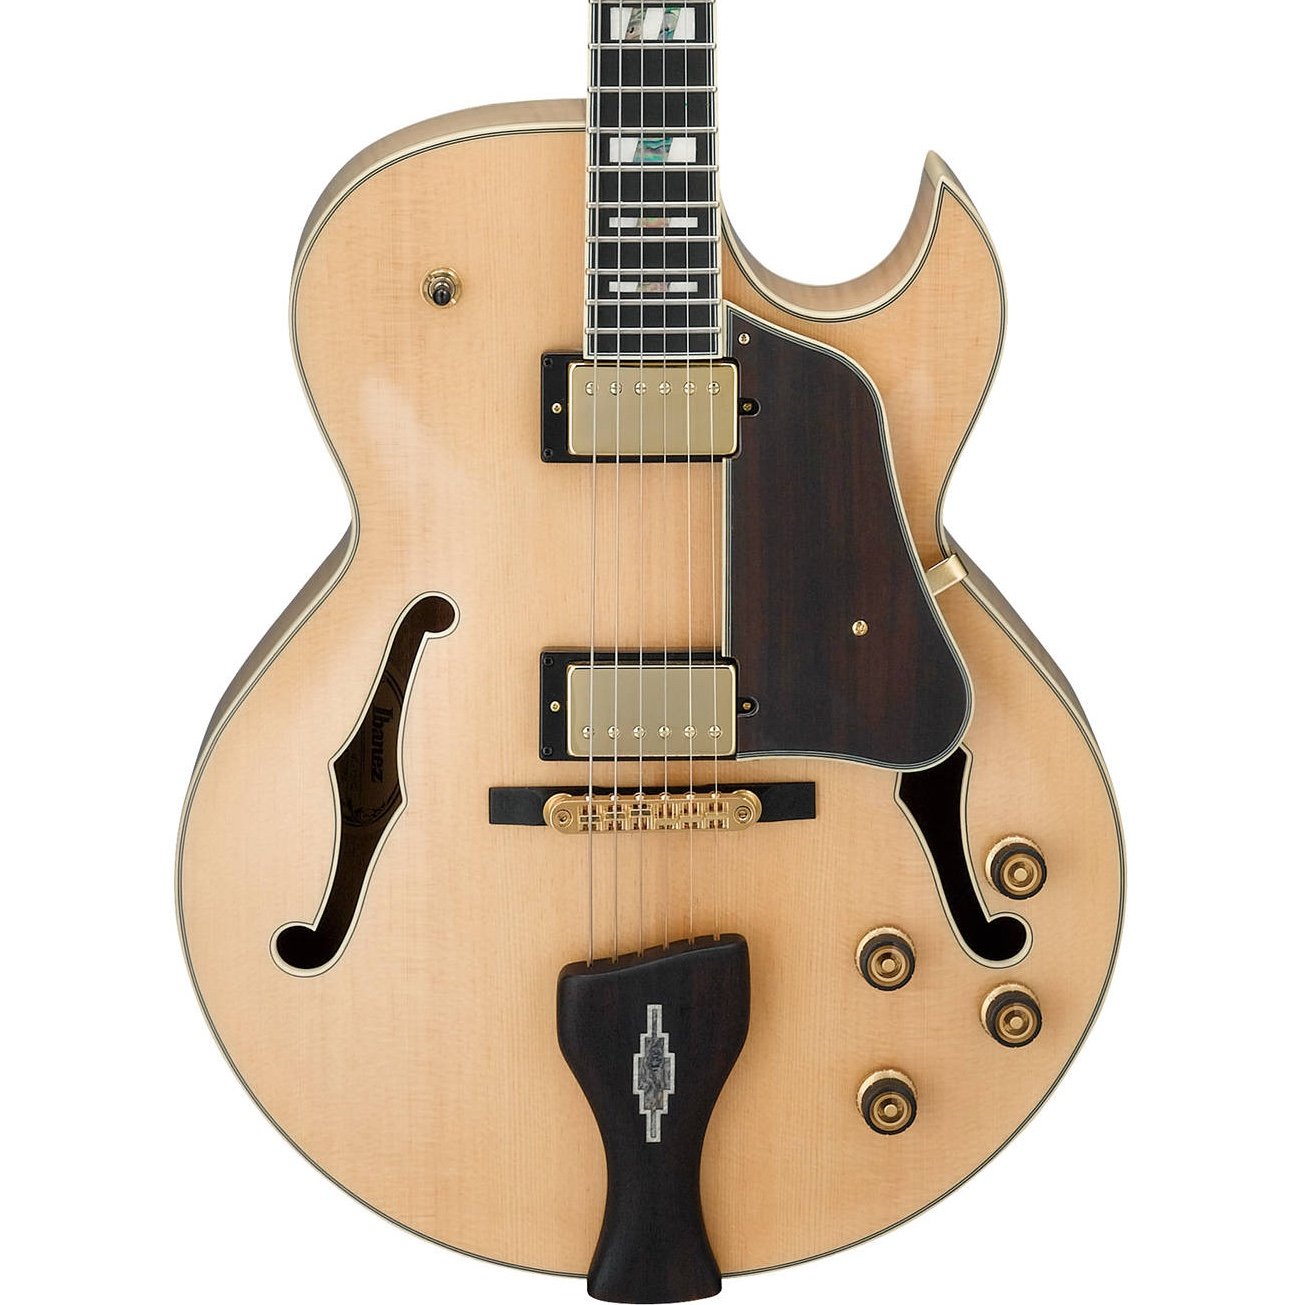 Ibanez LGB30-NT George Benson Signature Natural | Music Experience | Shop Online | South Africa